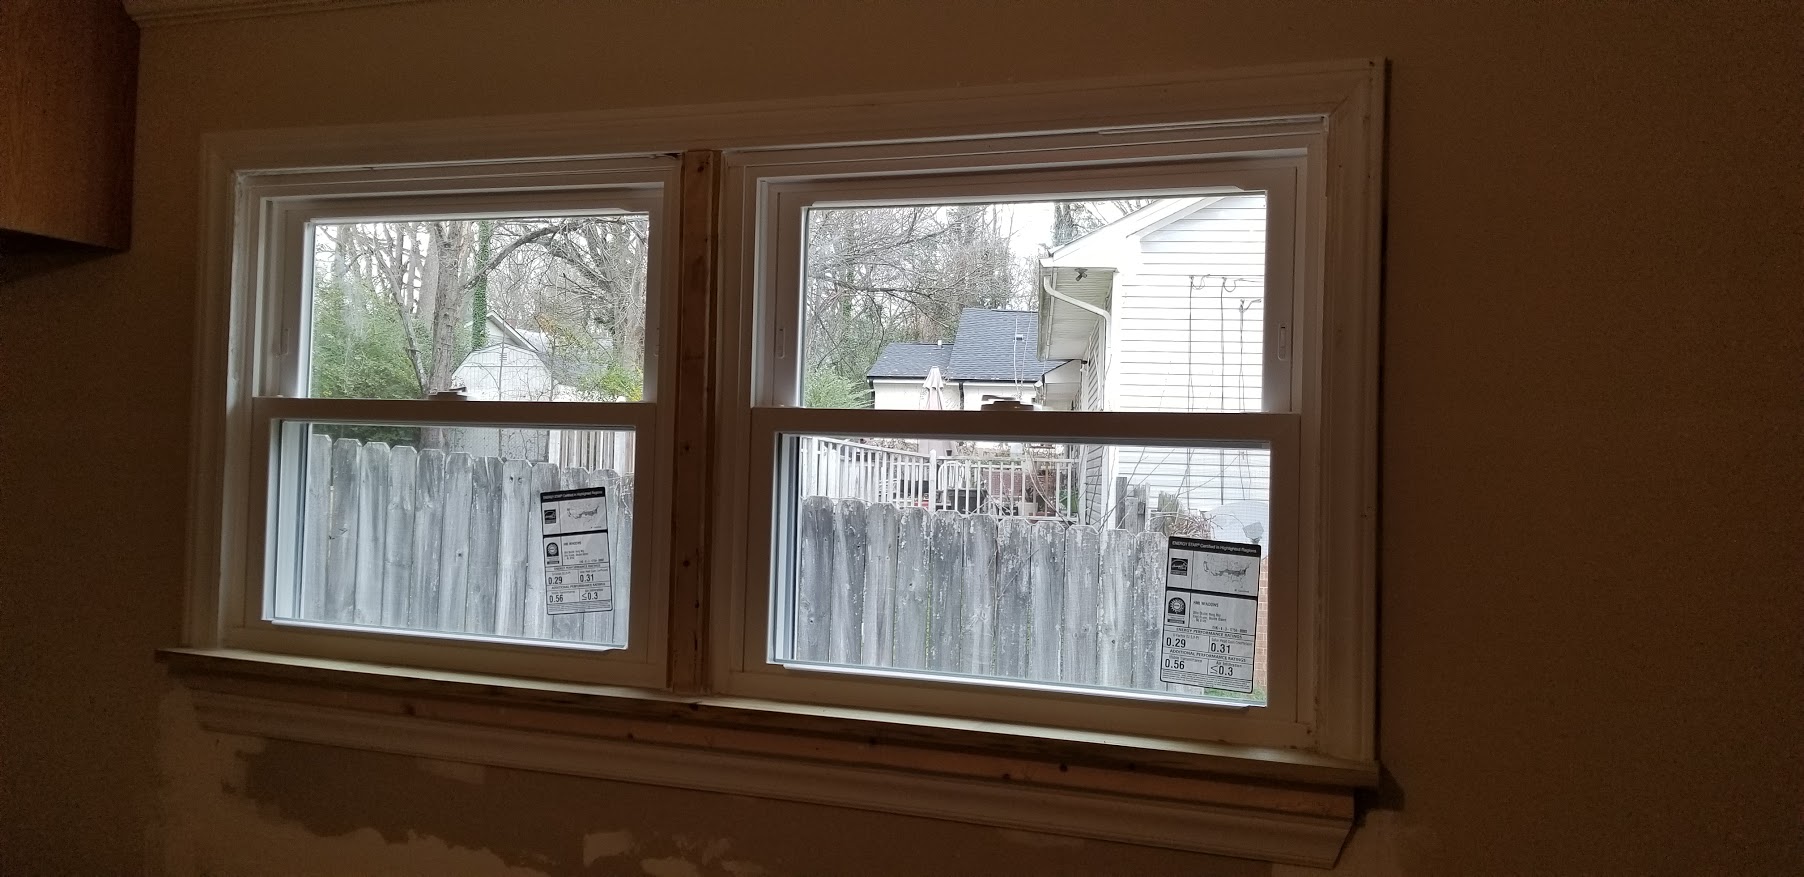 Old house window replacement with reused trim